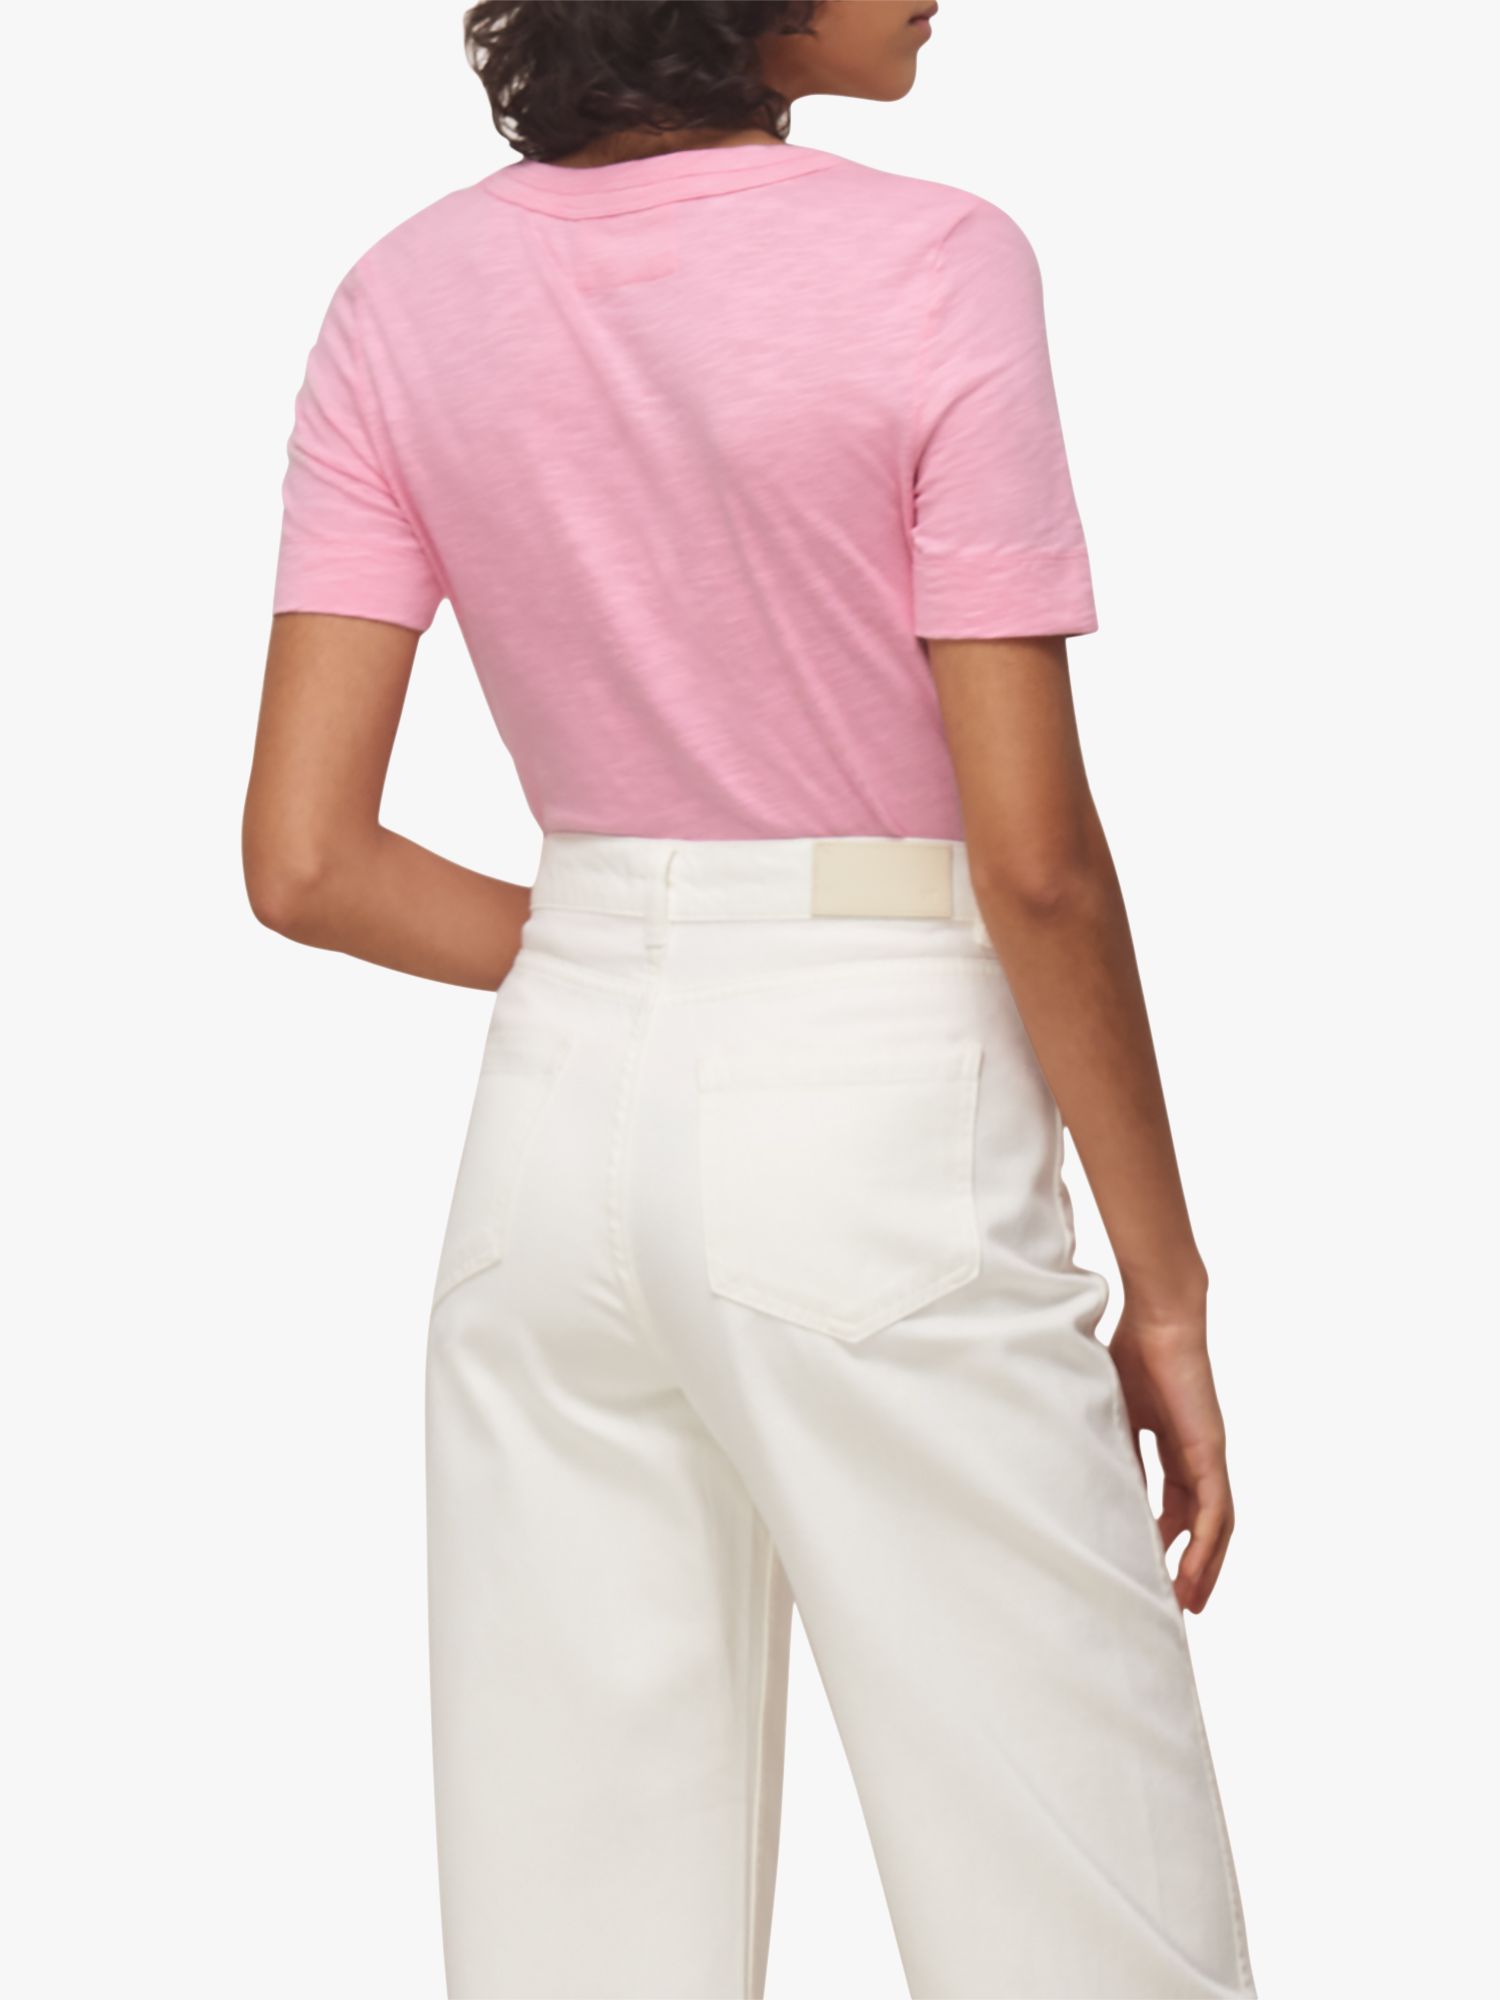 Whistles Rosa Double Trim T-Shirt, Pink at John Lewis & Partners